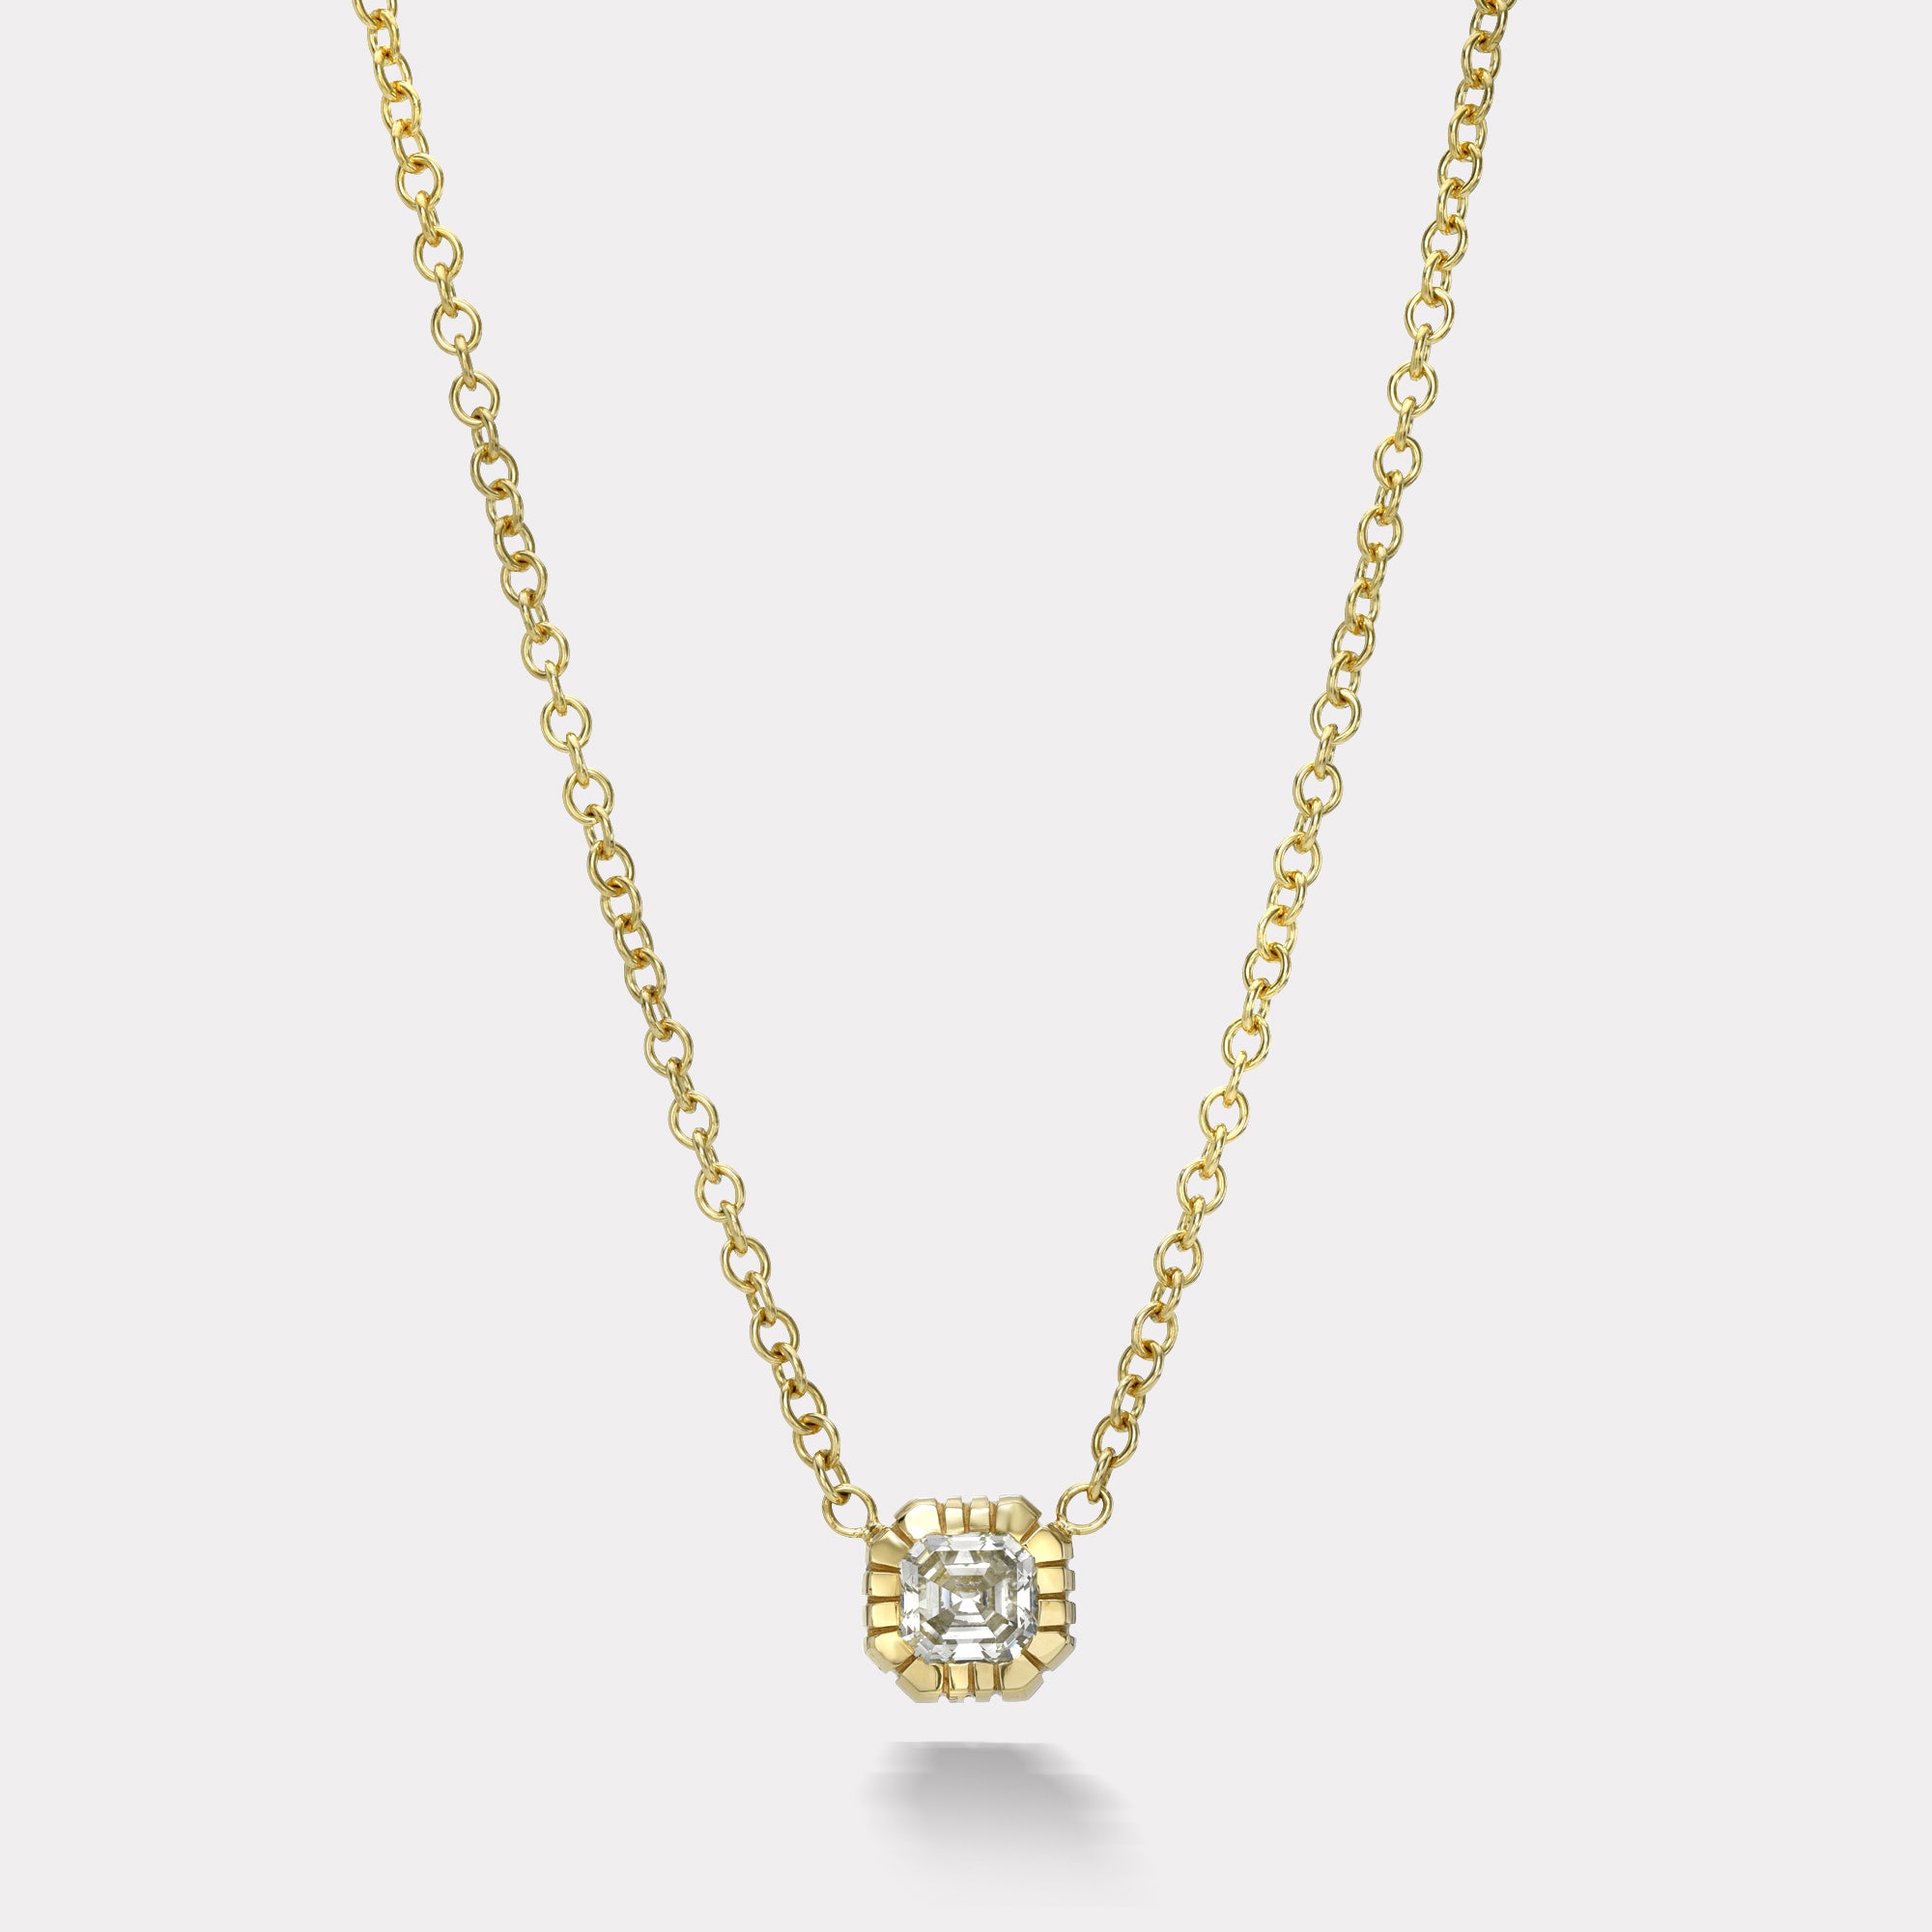 2 CT Asscher Cut Solitaire Pendant Necklace in 14k White, Yellow, or Rose  Gold